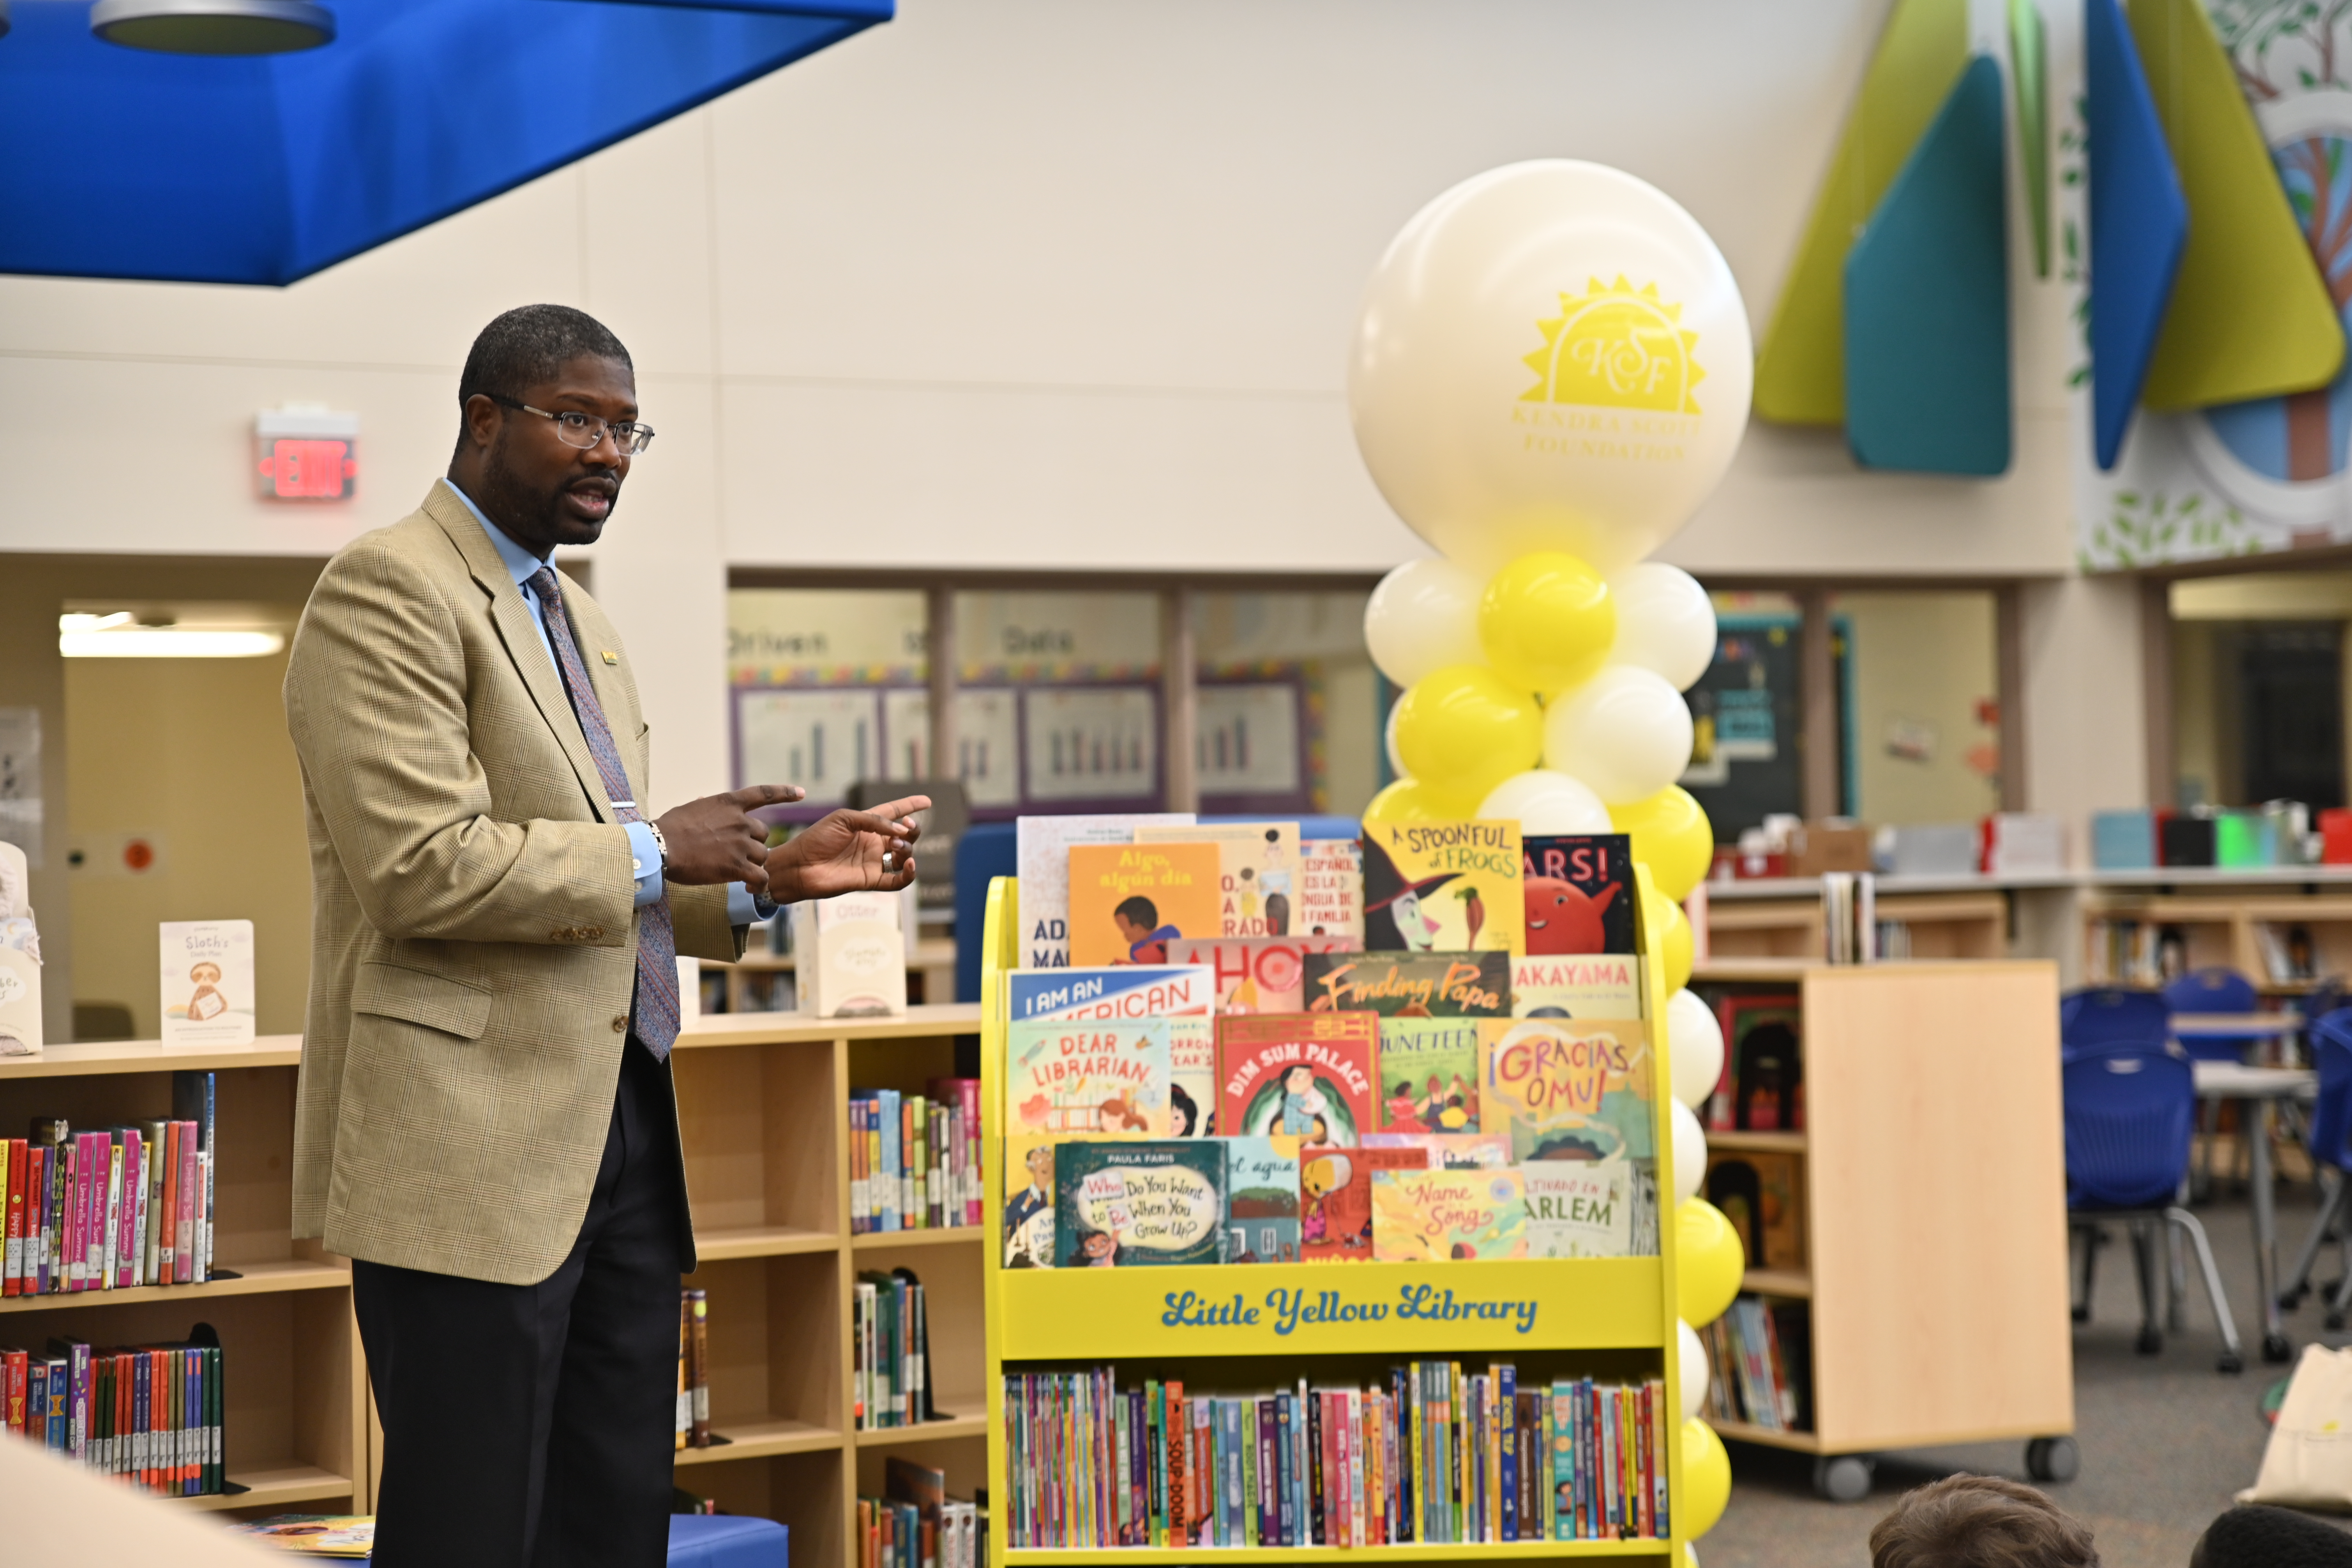 Dr. Mays at the Kendra Scott Foundation Library Event